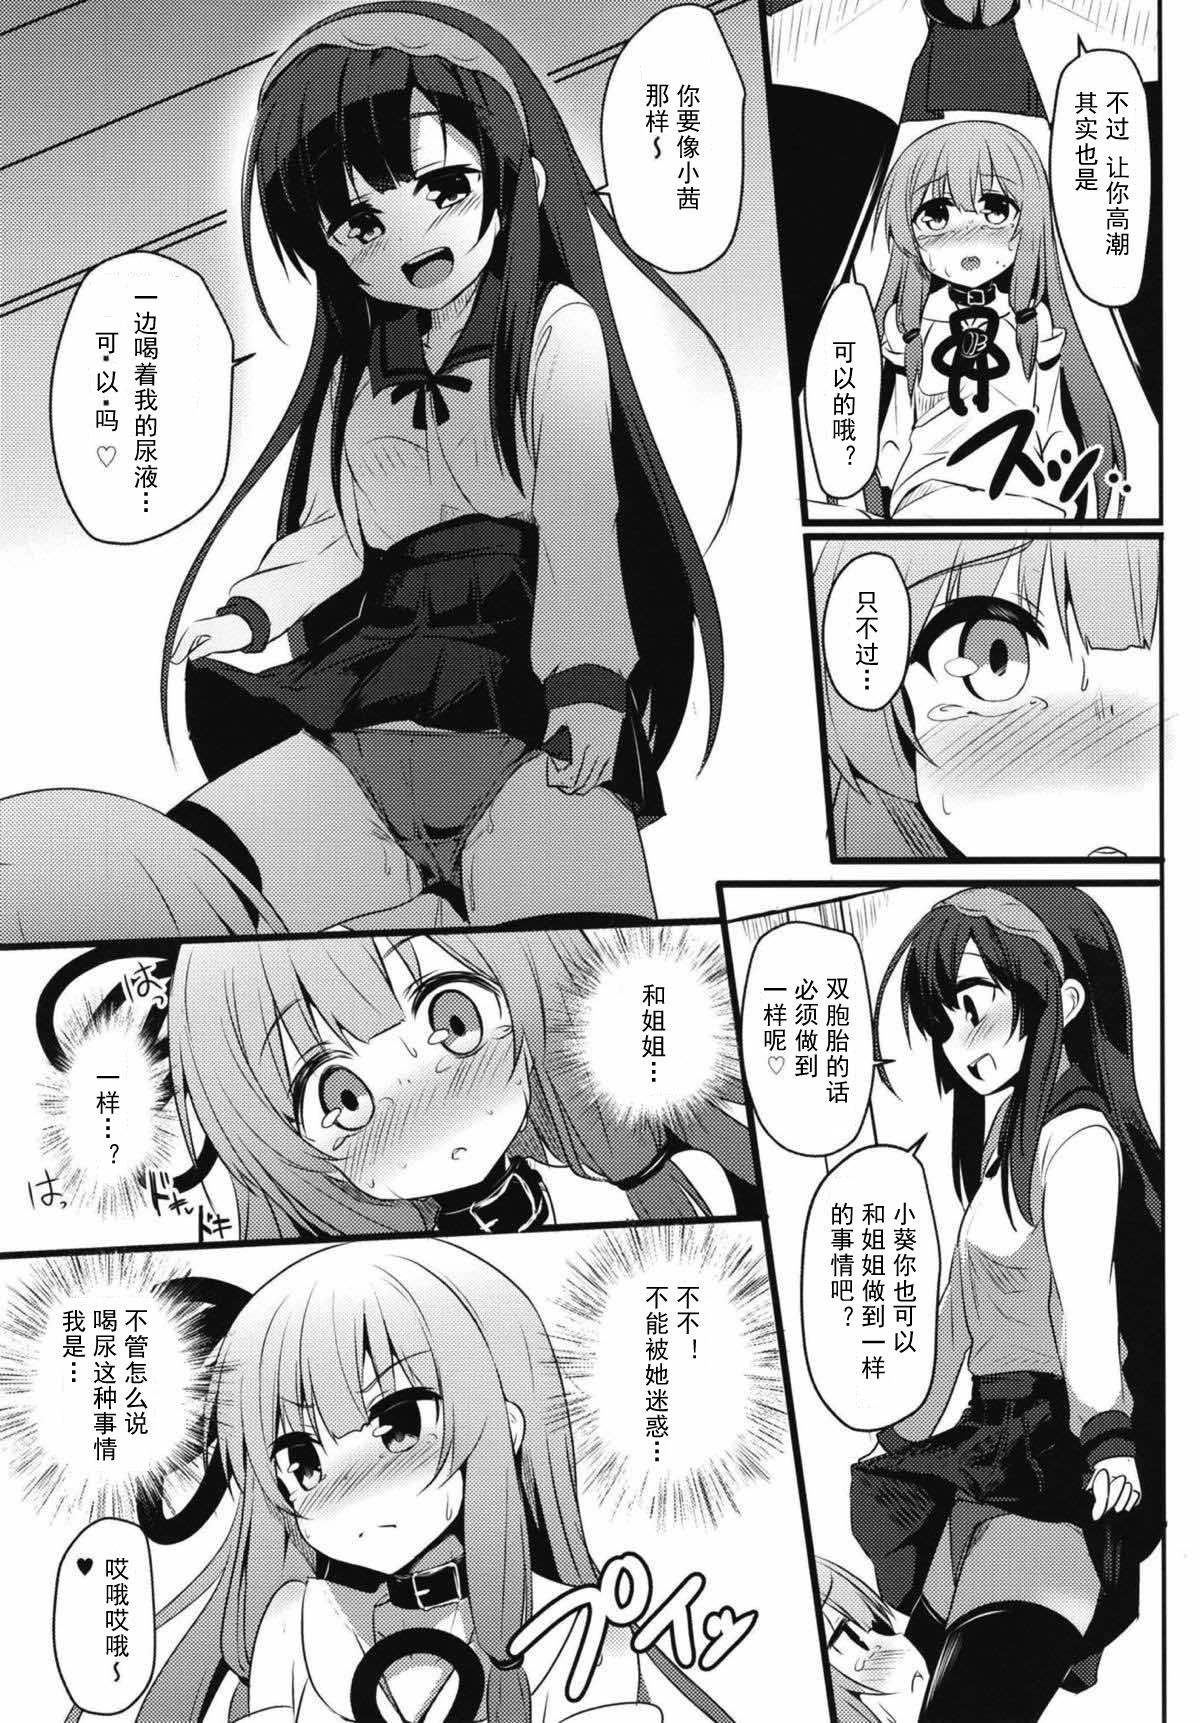 Indian (Kotonoha's Festa 2) [Milk Pudding (Jamcy)] Akane-chan Challenge! 2.5-kaime (VOICEROID) [Chinese] [古早个人汉化] - Voiceroid Hot Naked Women - Page 11